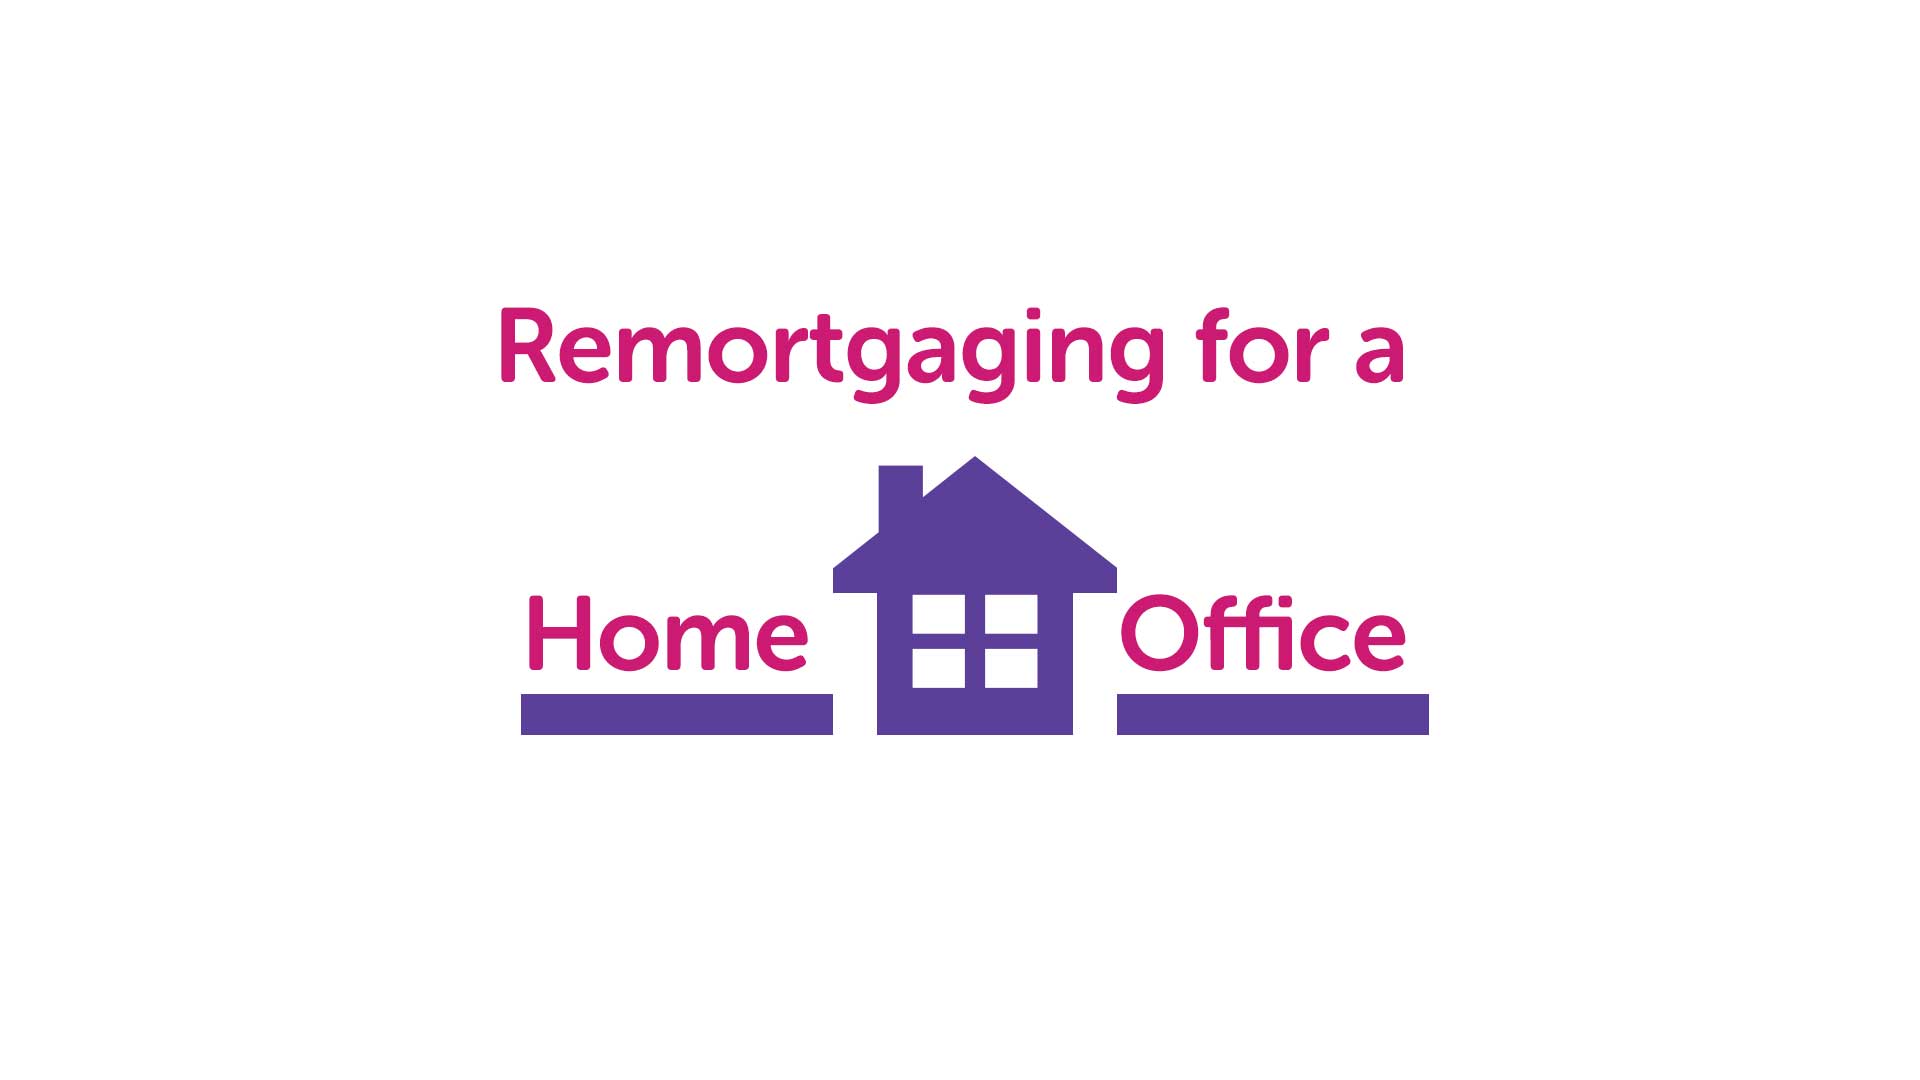 Remortgage for a Home Office in Leicester